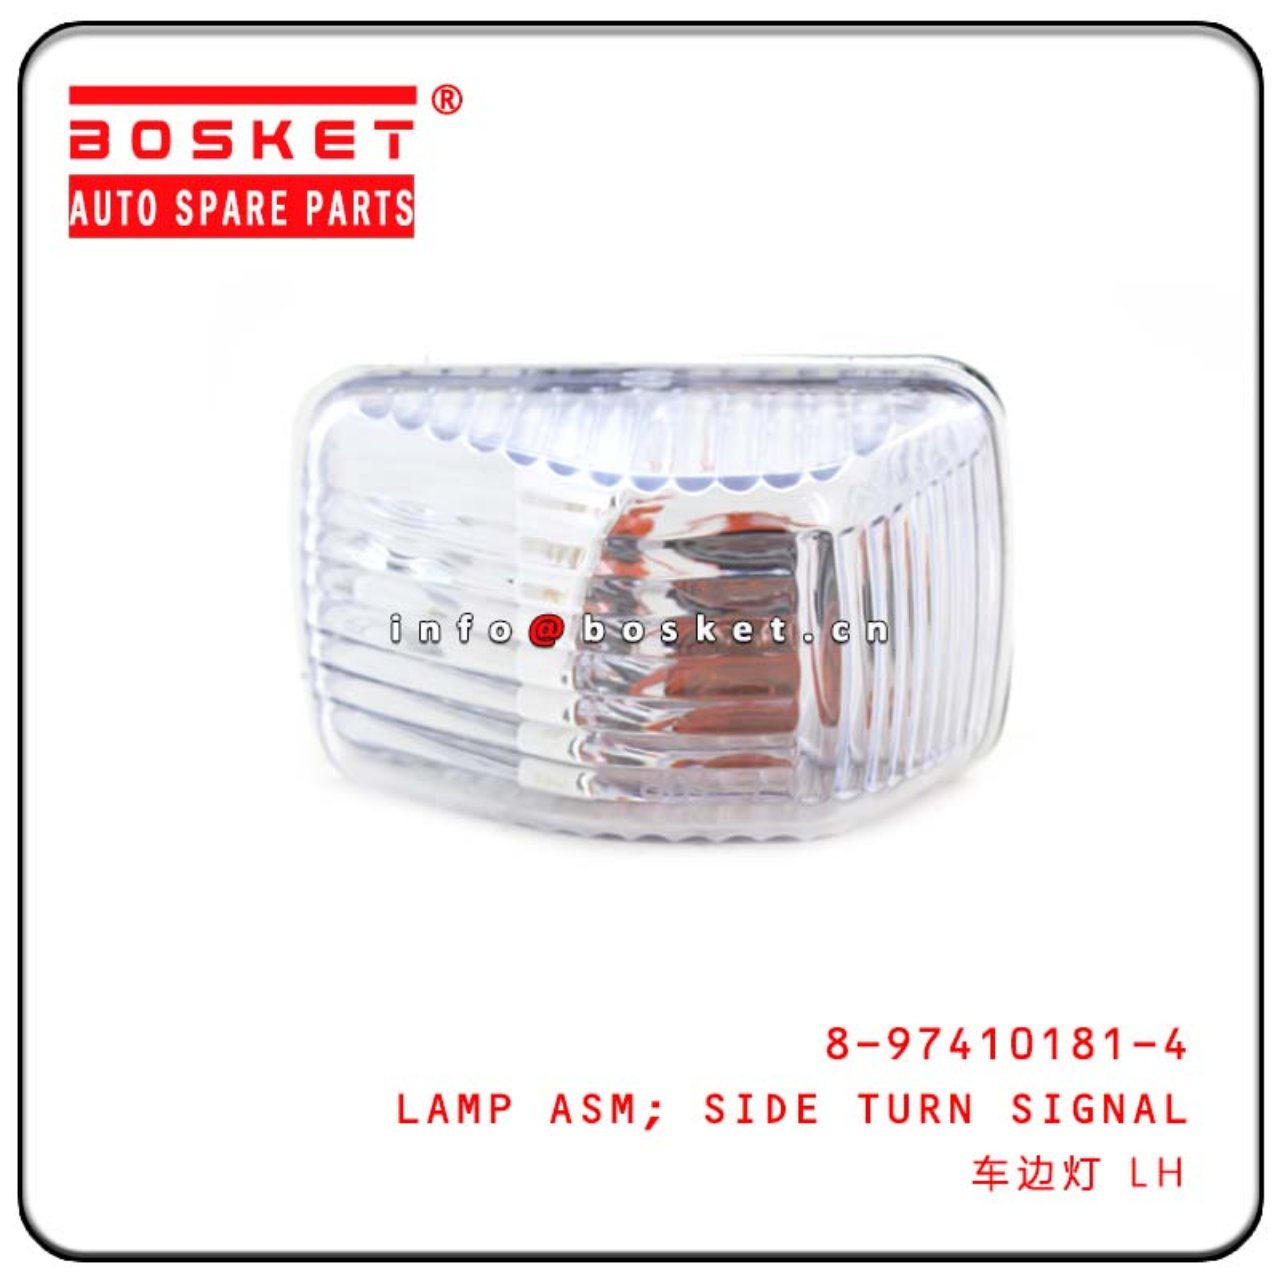 8974101814 8-97410181-4 Side Turn Signal Lamp Assembly Suitable for ISUZU 700P